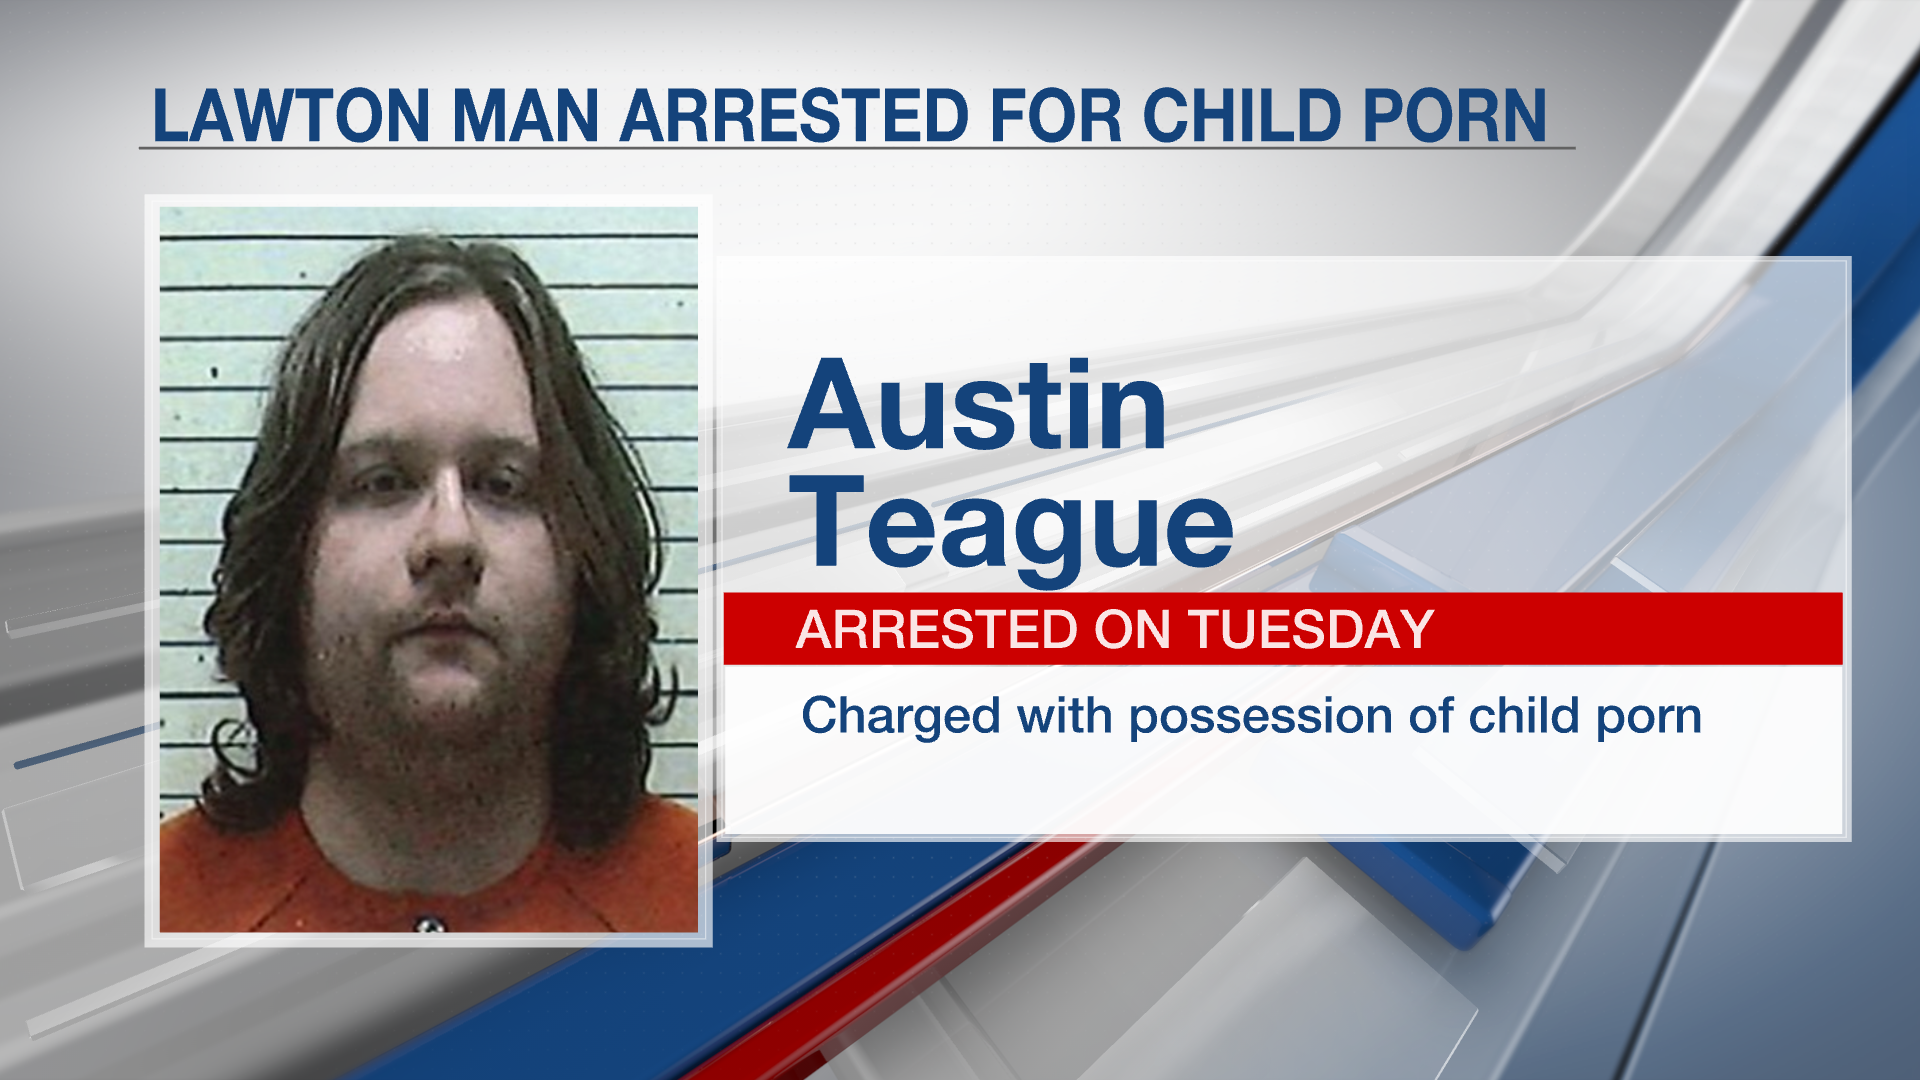 School Detention - Lawton man arrested, charged with child porn possession